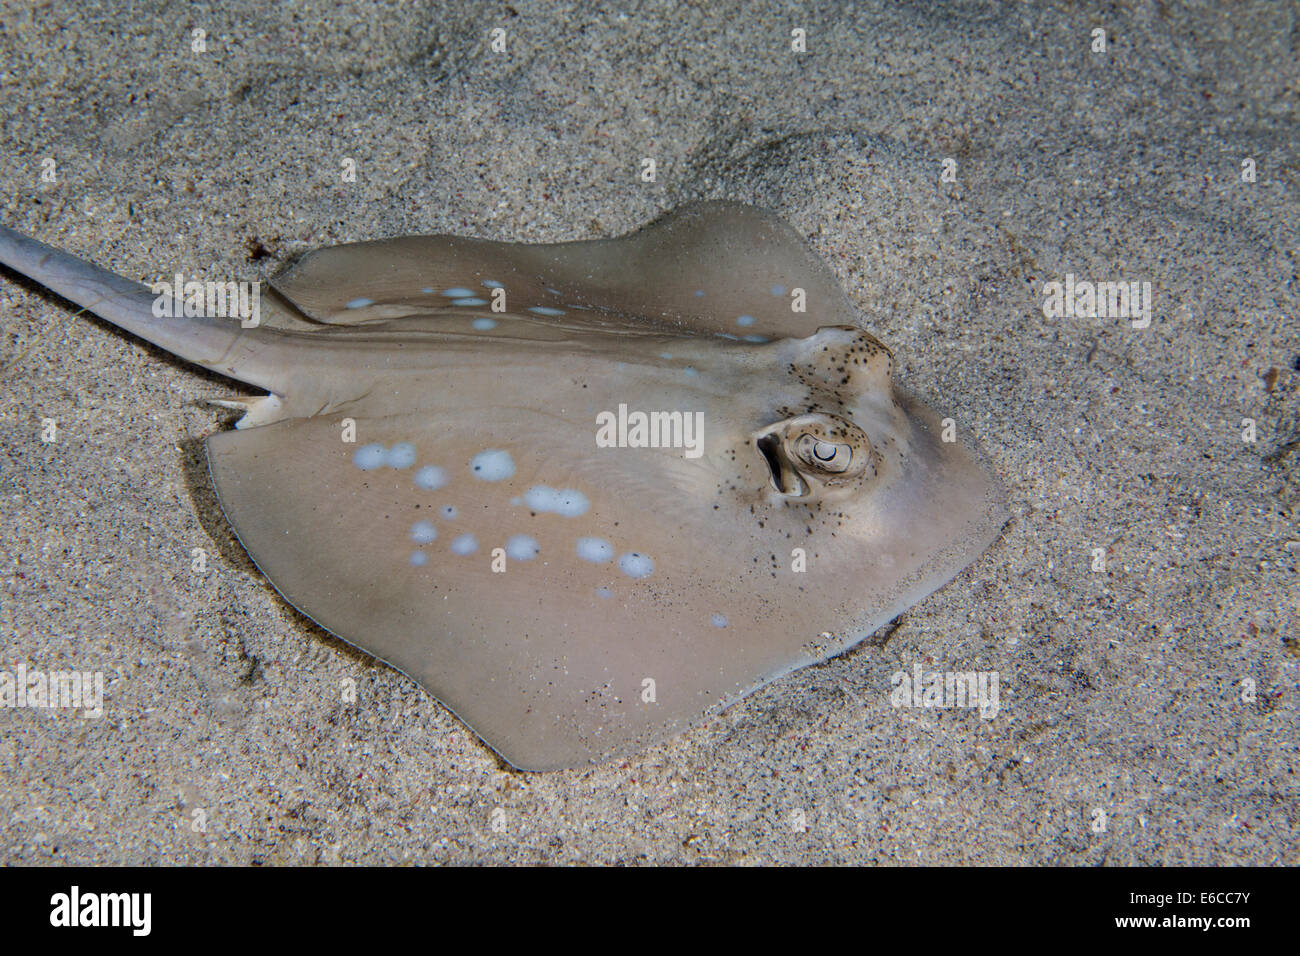 Bluespotted stingray resting at night in the sand. Stock Photo